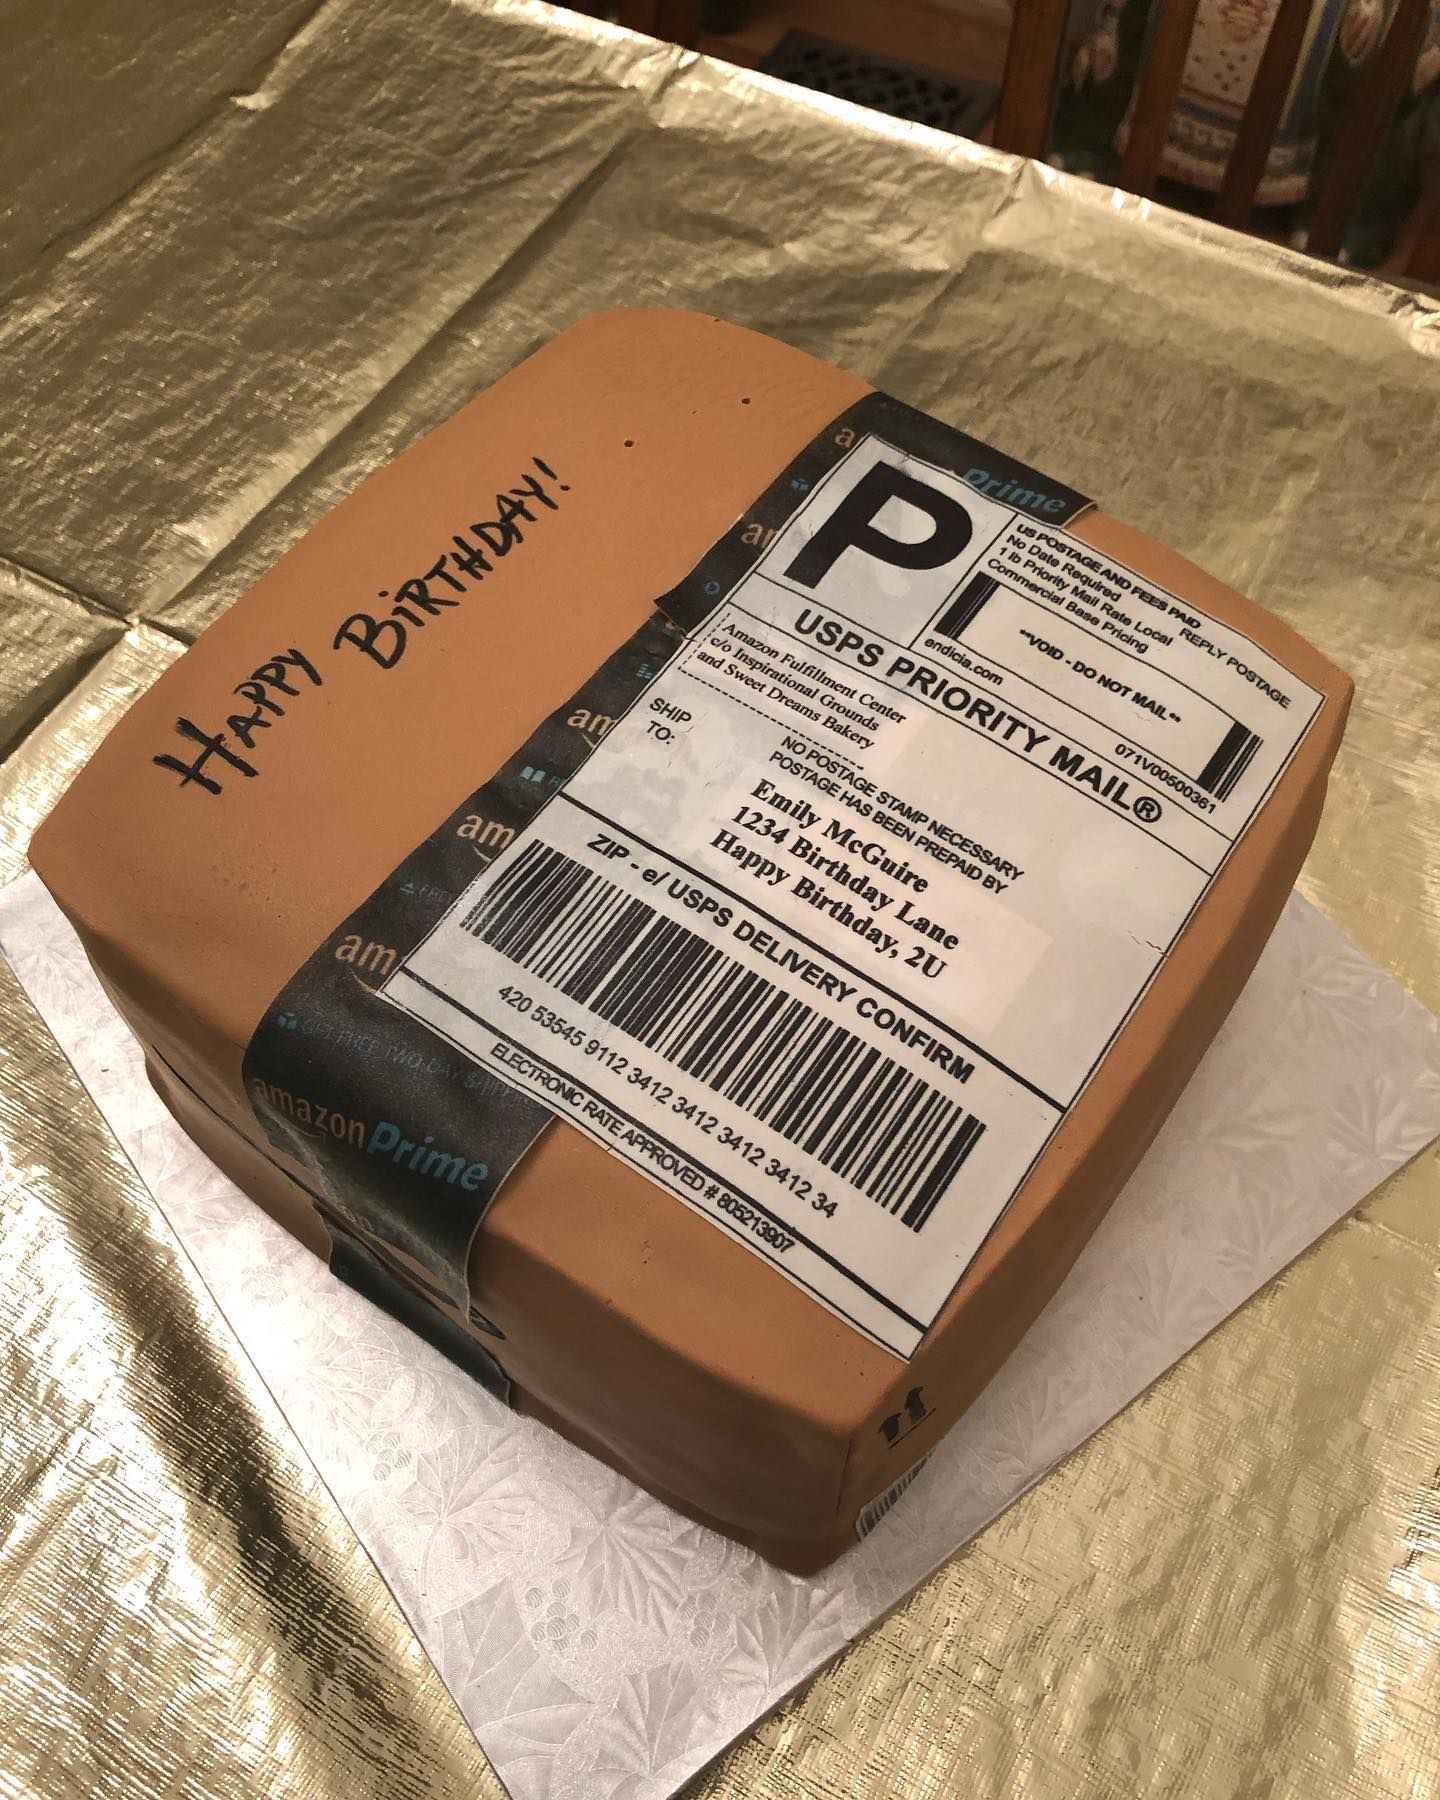 Amazon Box Delivery Cake - Picture of Flavor Cupcakery & Bake Shop, Bel Air  - Tripadvisor